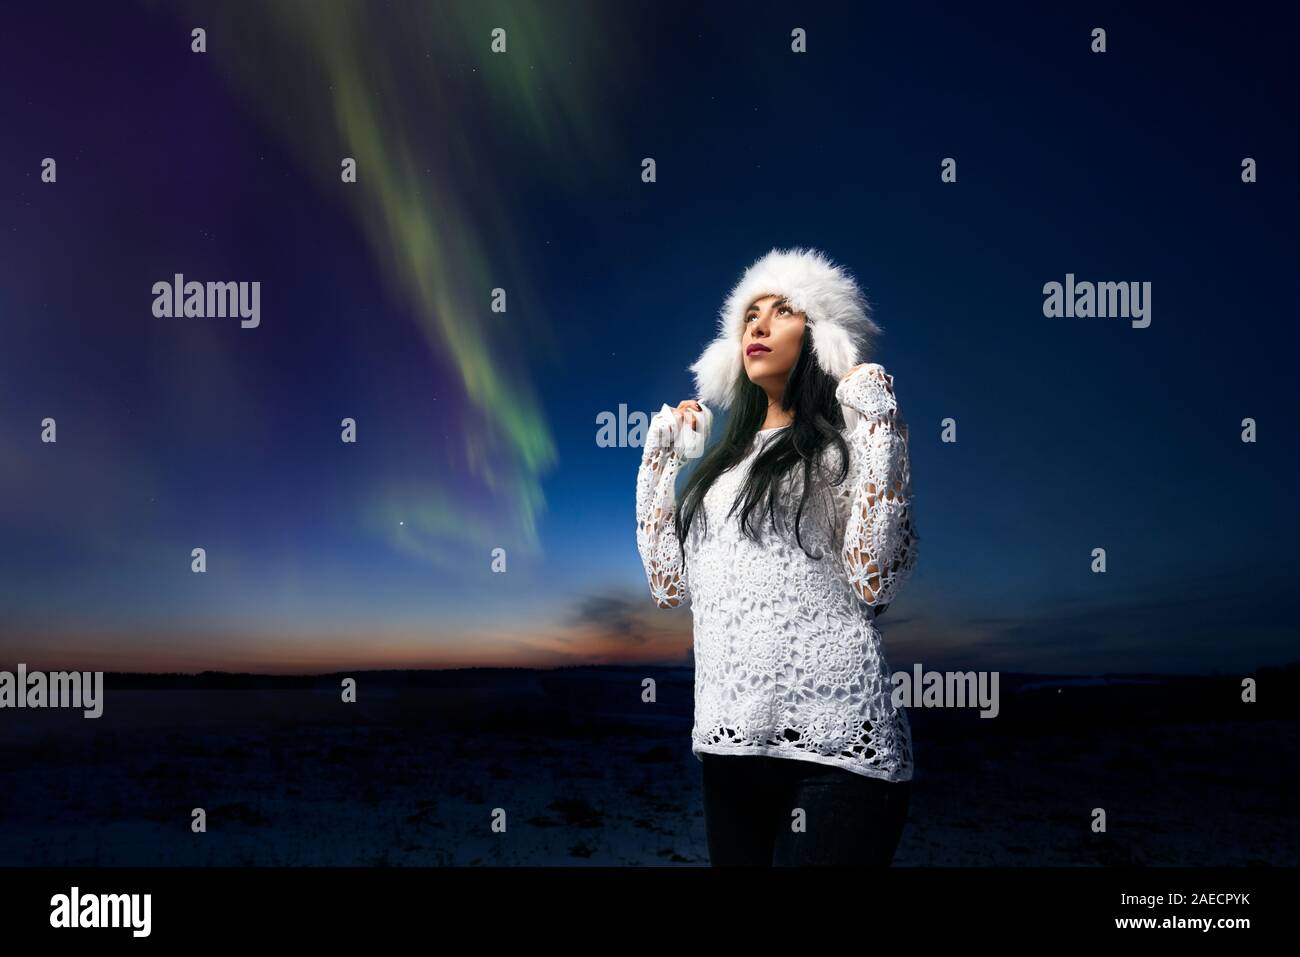 Gorgeous girl in stylish winter hat and white knitted blouse looking at night sky and admiring winter radiance. Romantic lady on background of field and bright stripes on sky. Stock Photo